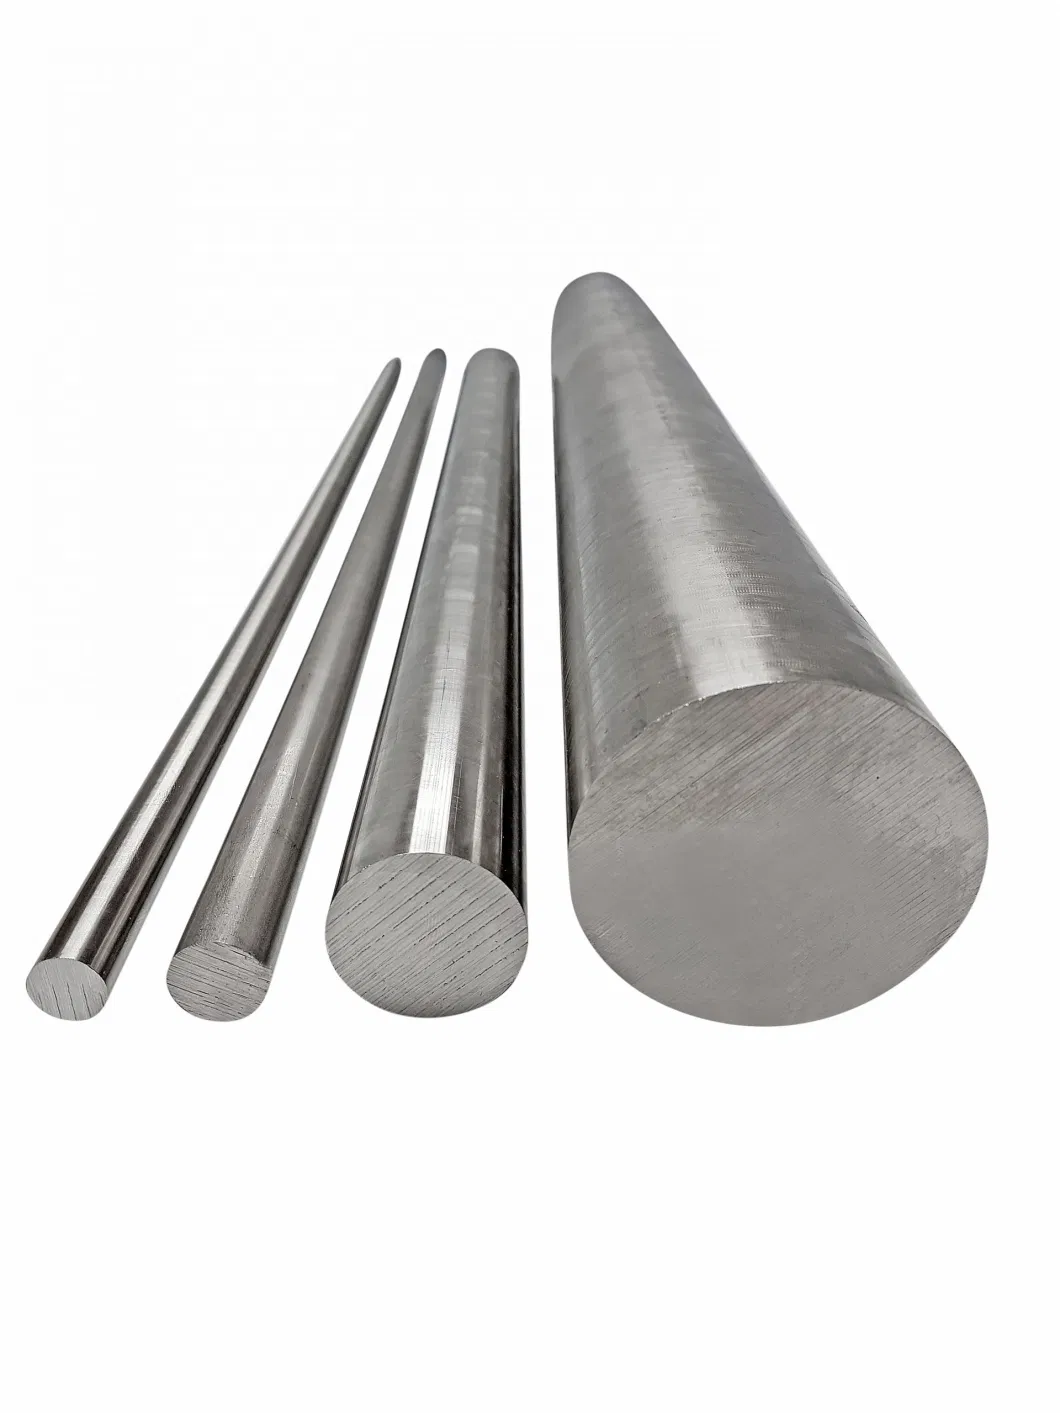 Good Quality 201 304 310 316 321 Stainless Steel Round Bar 2mm 3mm 6mm Metal Rod